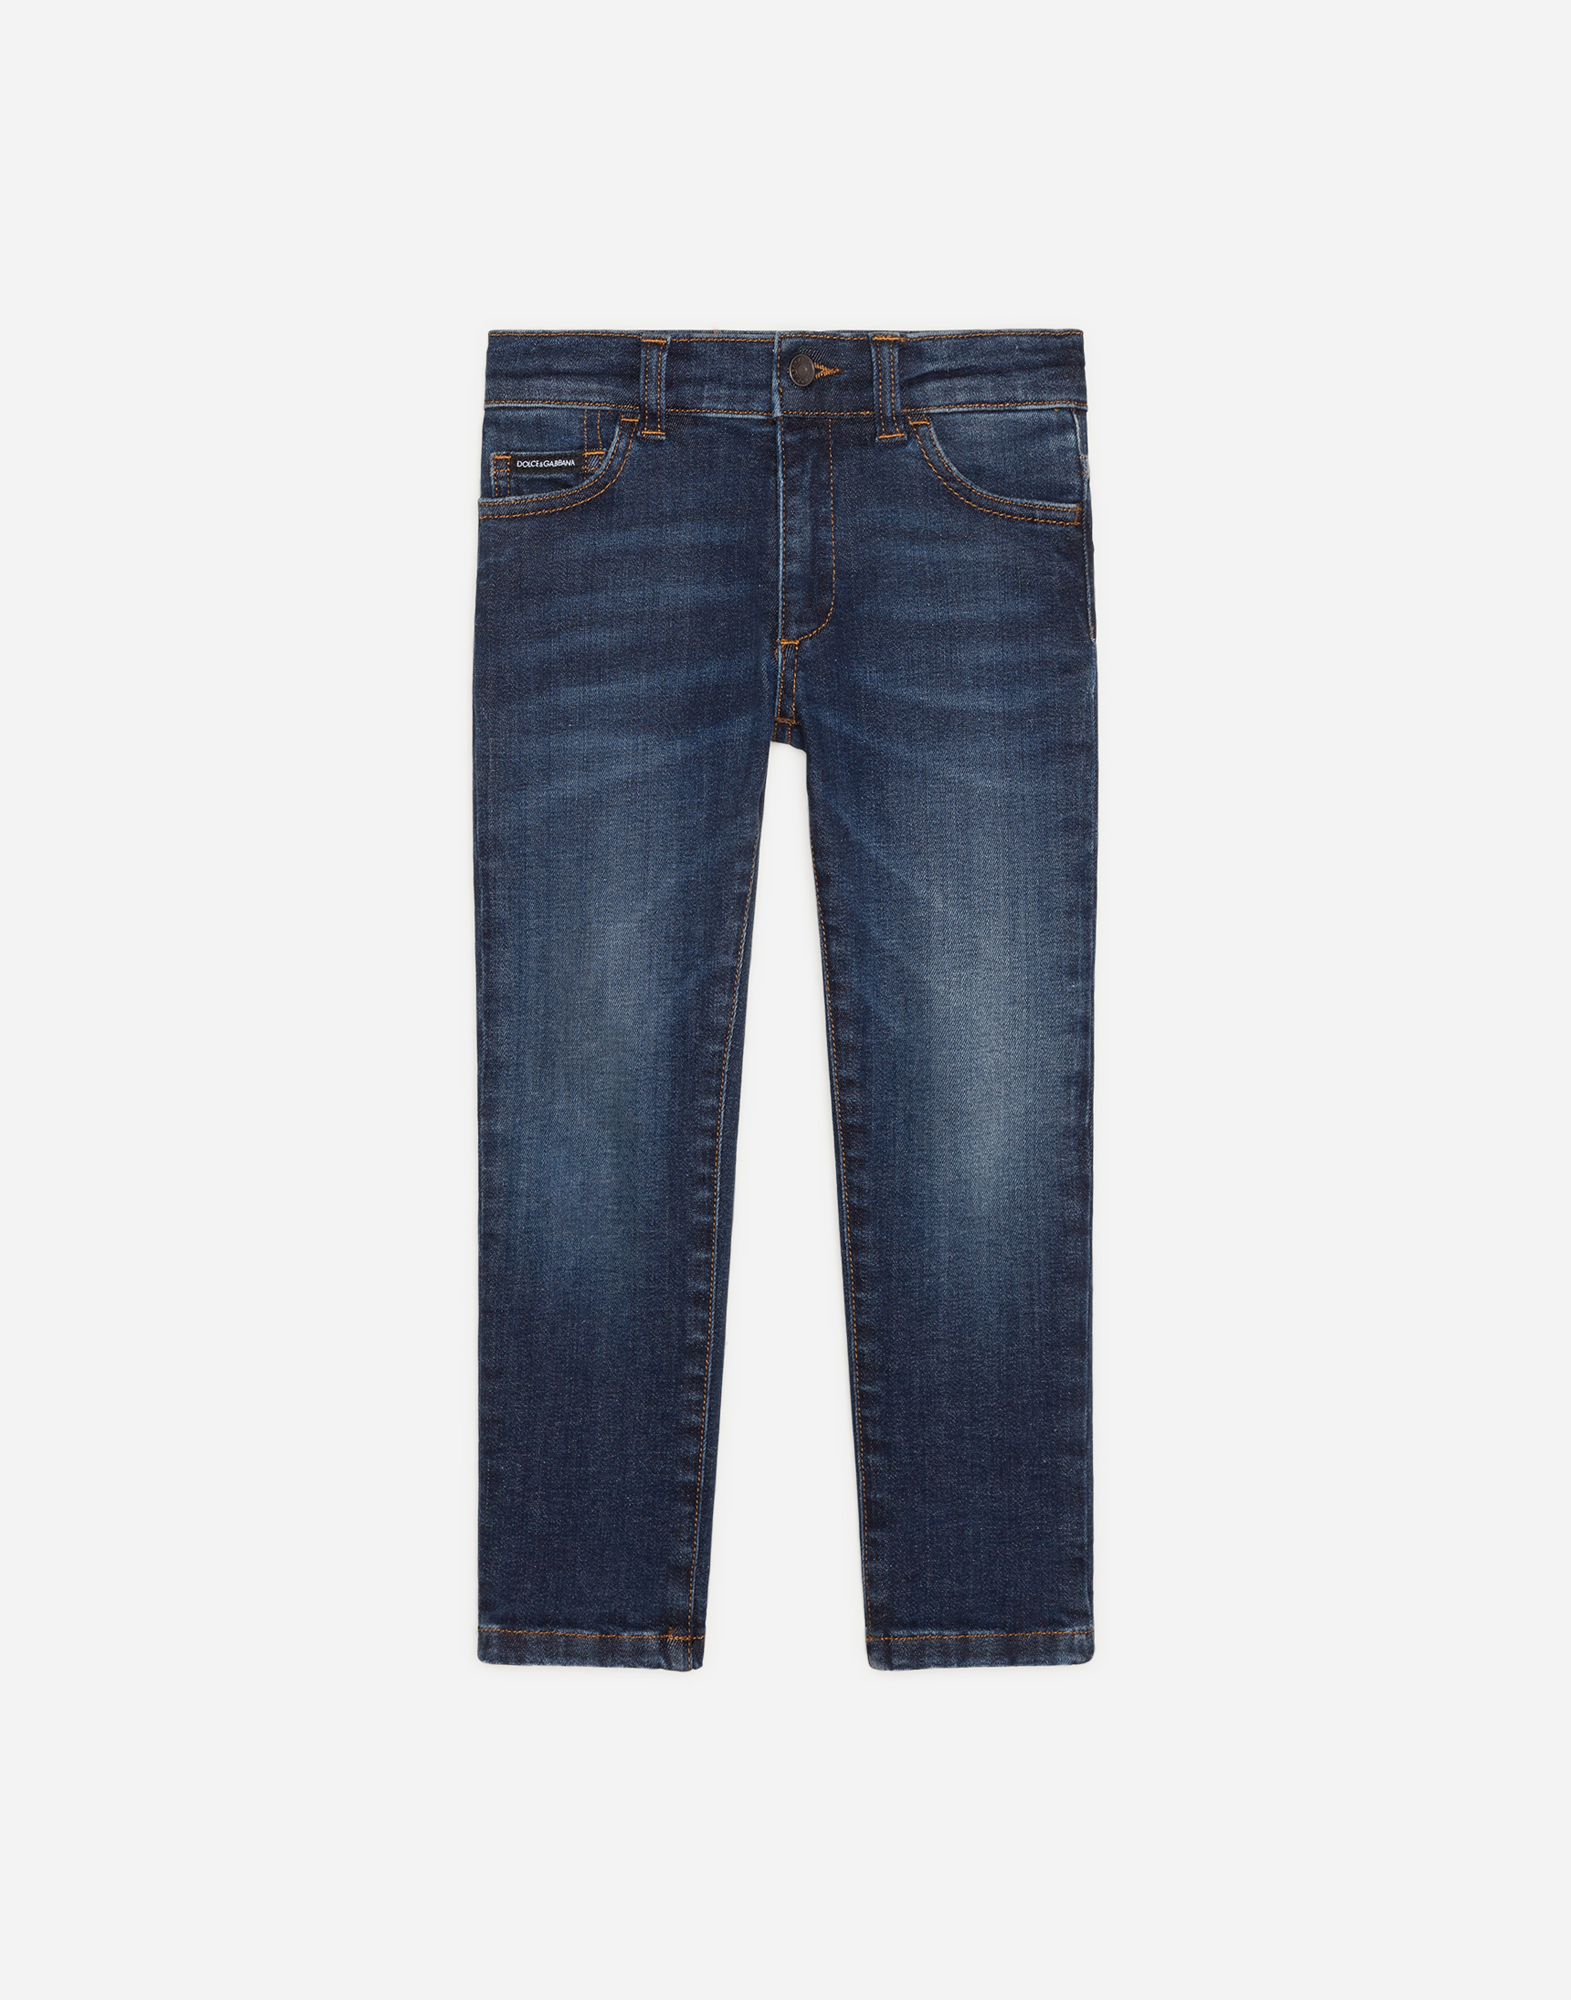 DOLCE & GABBANA Stretch slim-fit jeans with embroidered DG logo